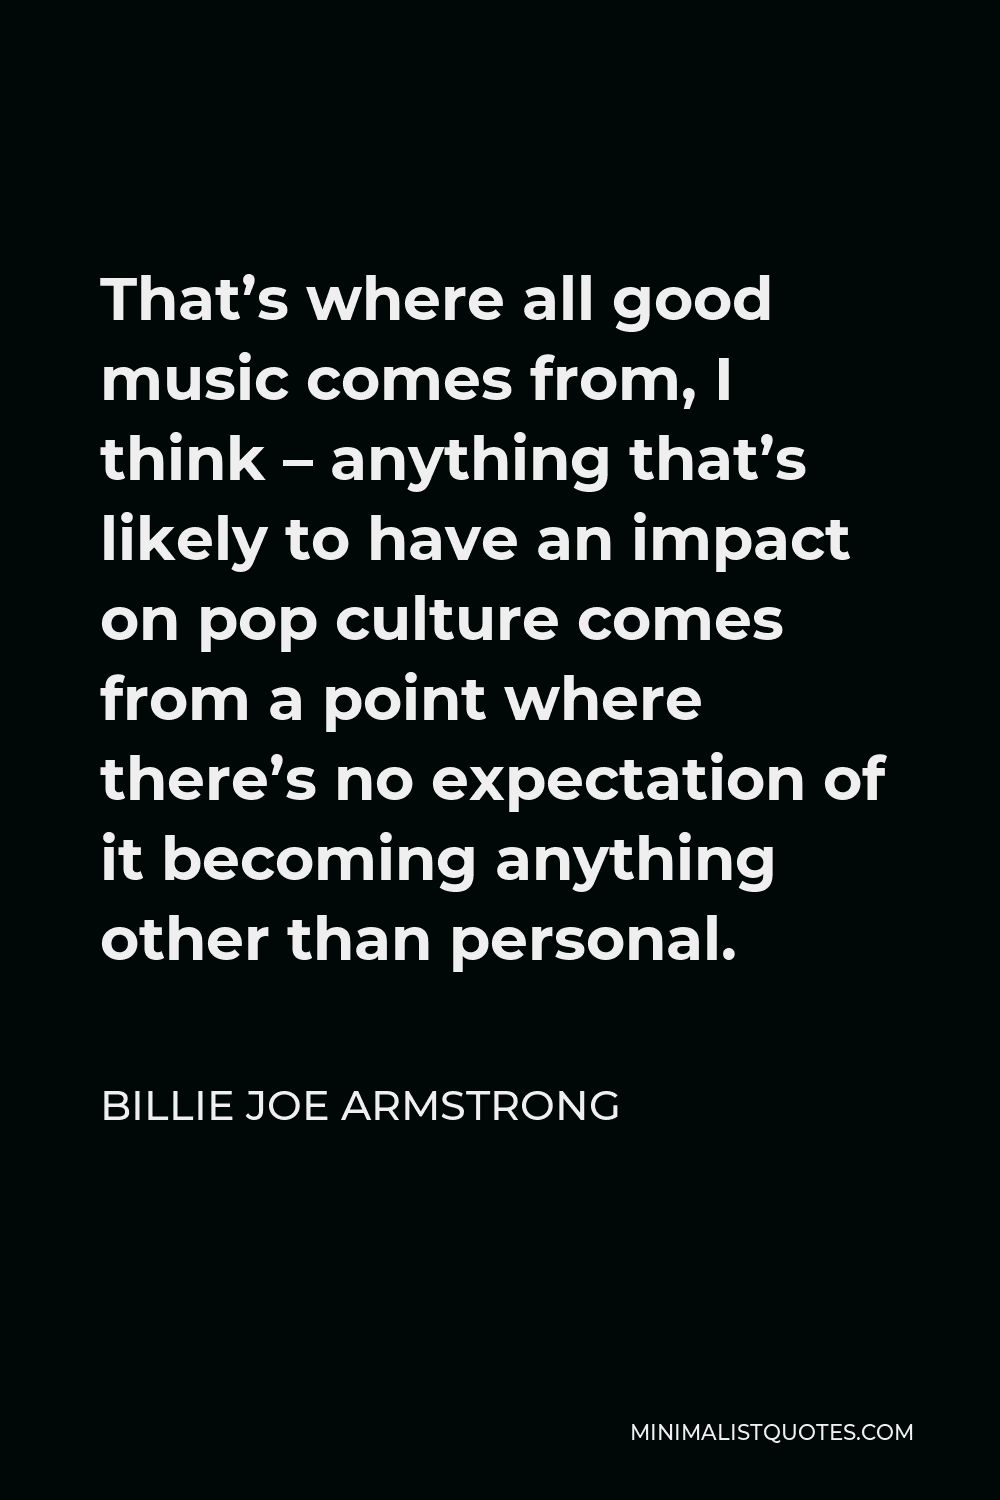 Billie Joe Armstrong Quote - That’s where all good music comes from, I think – anything that’s likely to have an impact on pop culture comes from a point where there’s no expectation of it becoming anything other than personal.